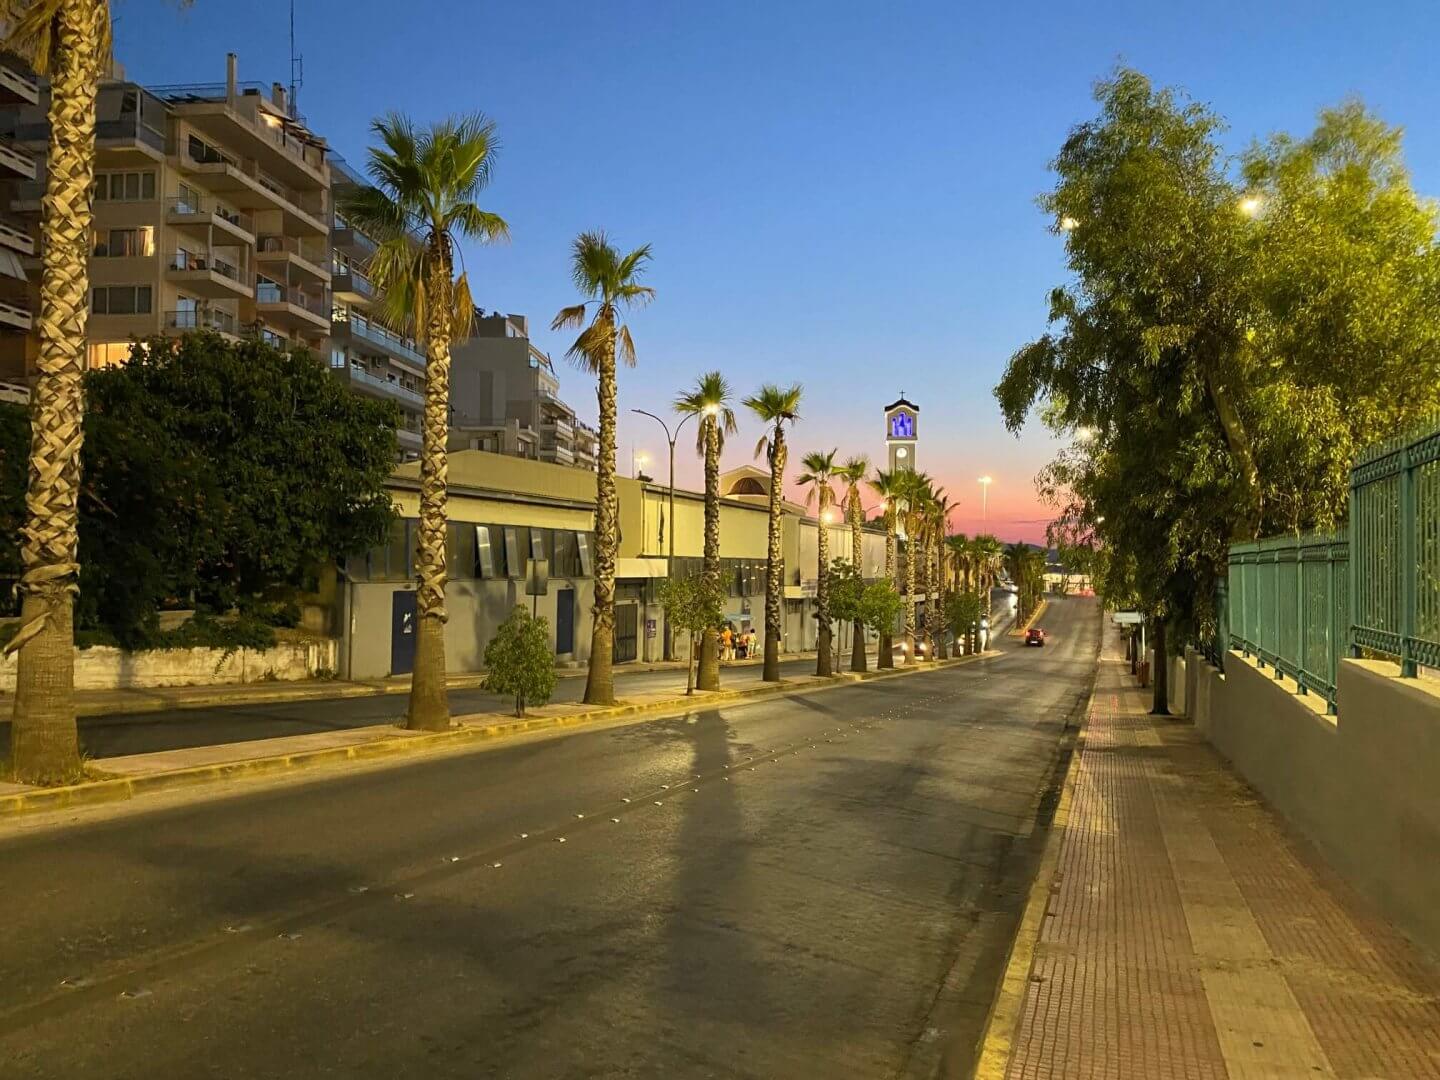 Palm tree lined street at sunset